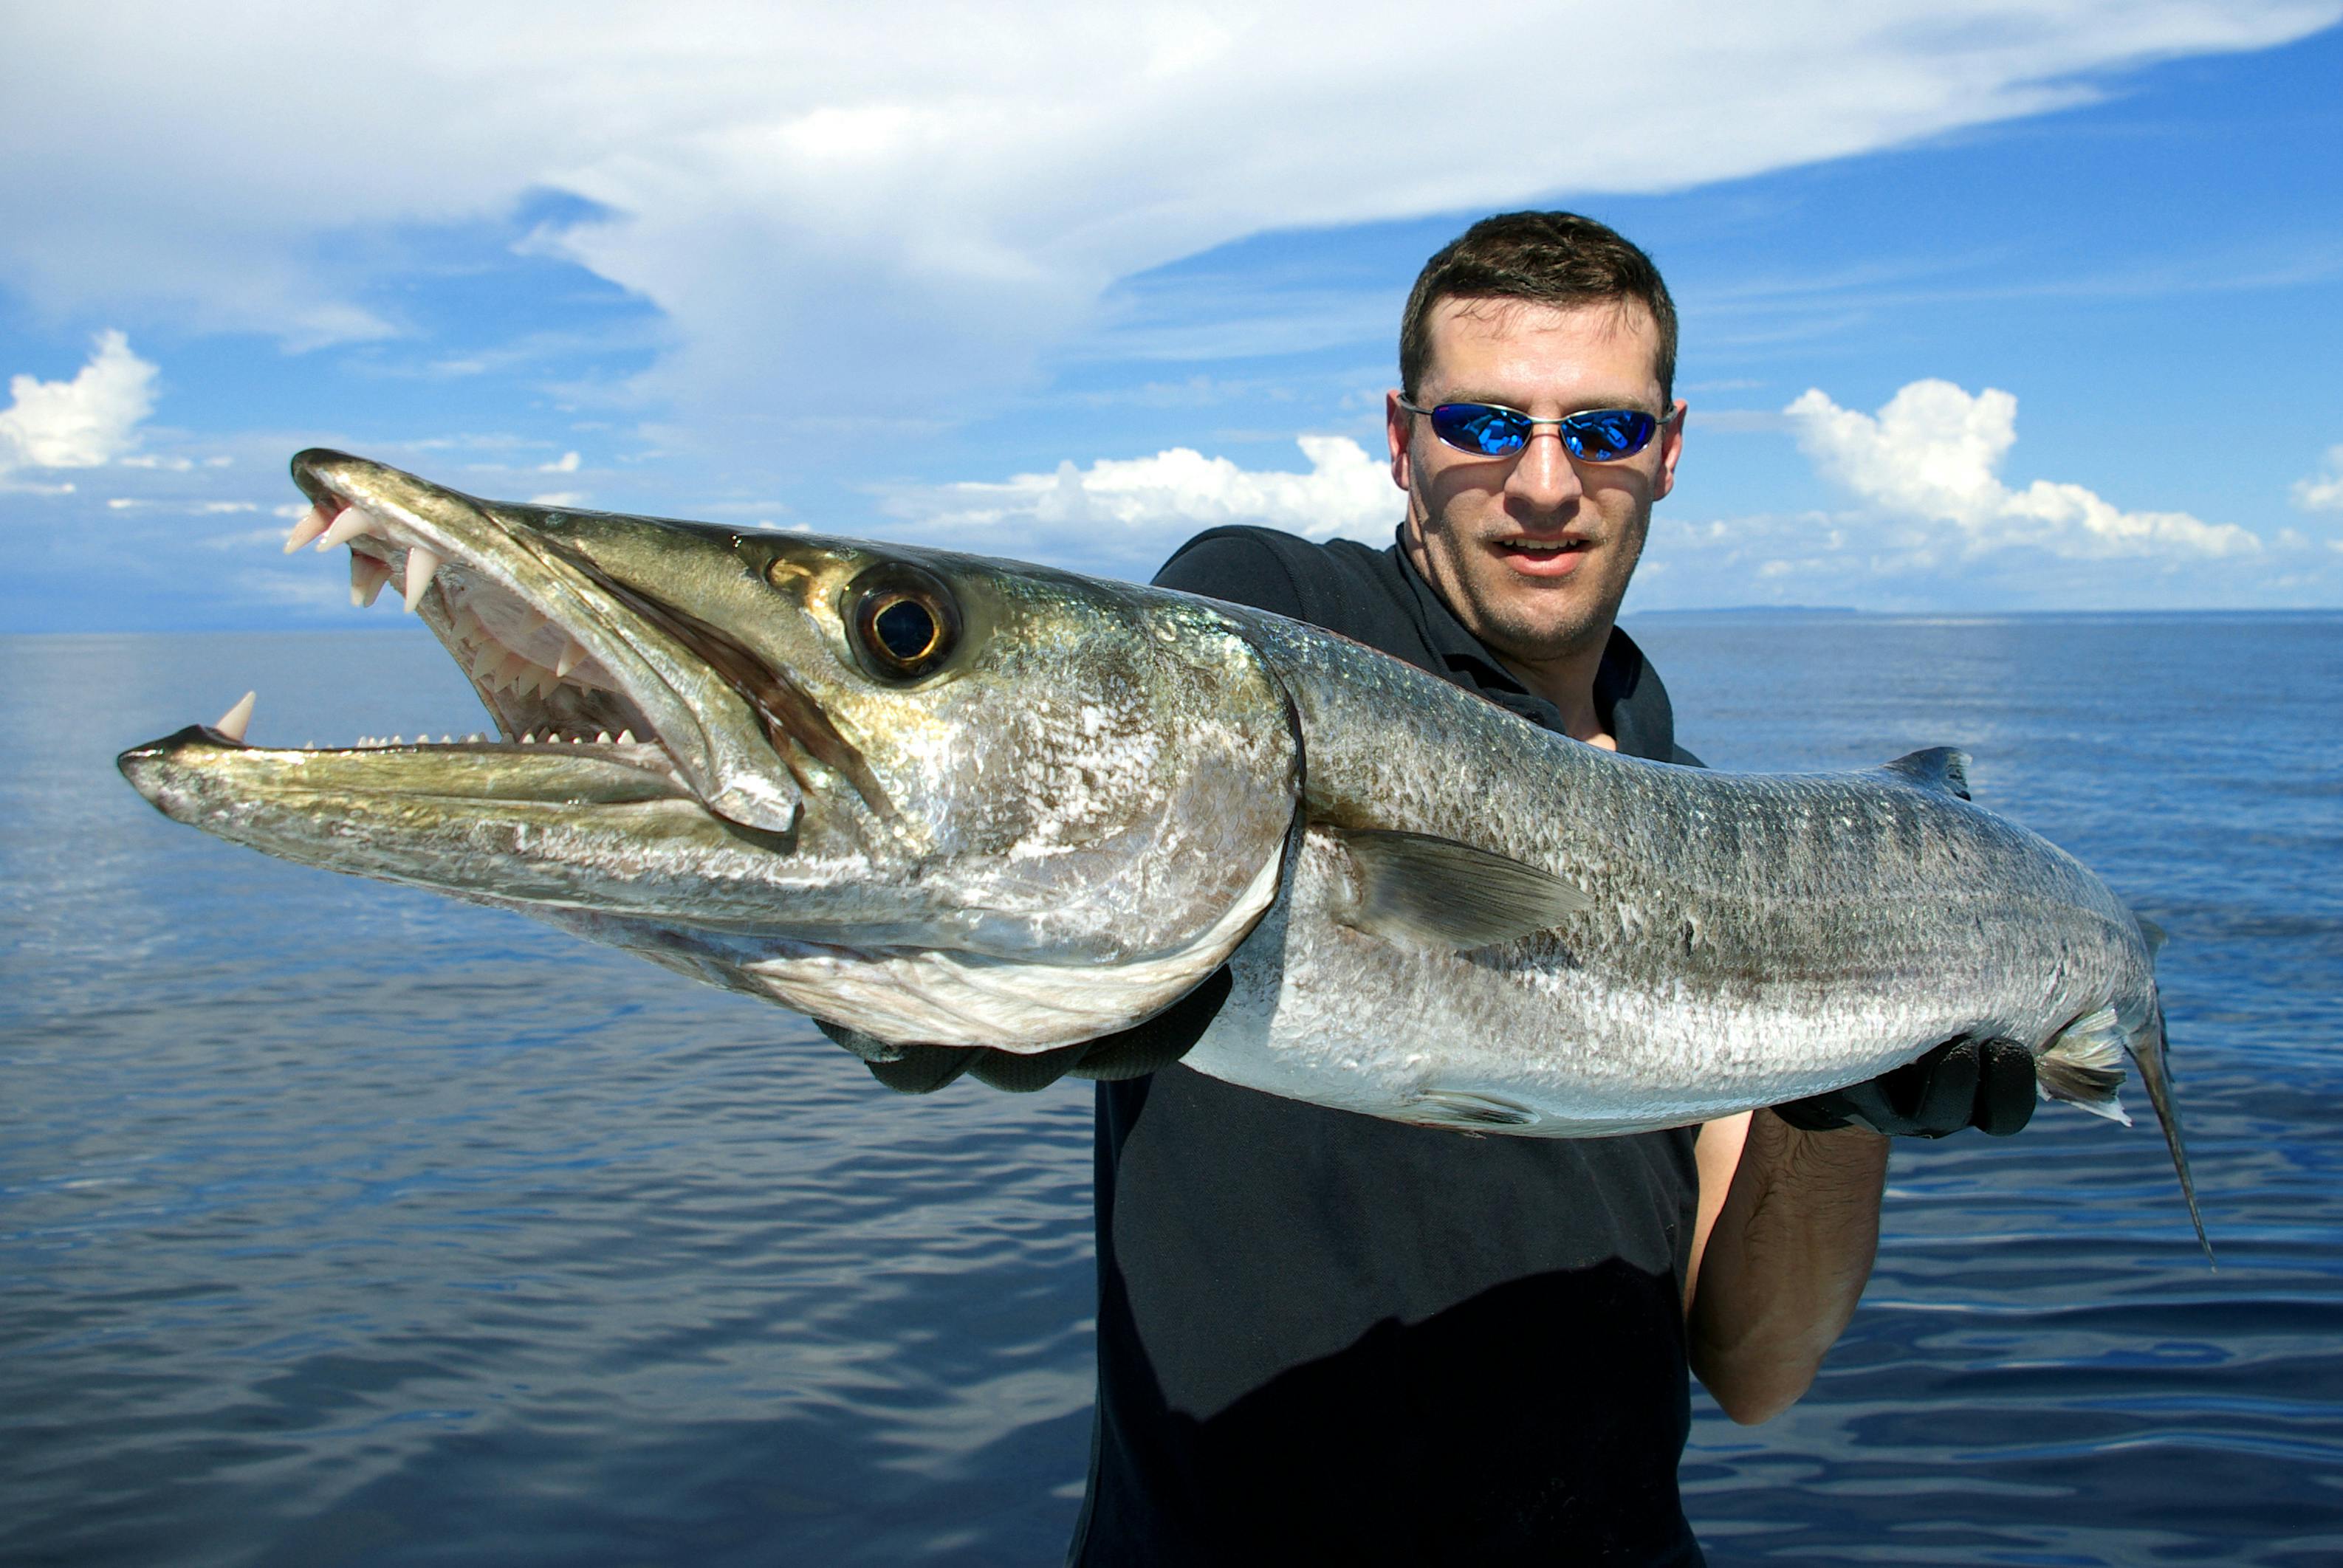 Angler with Barracuda near Harbourside at Marker 33 - Indian Rocks Beach